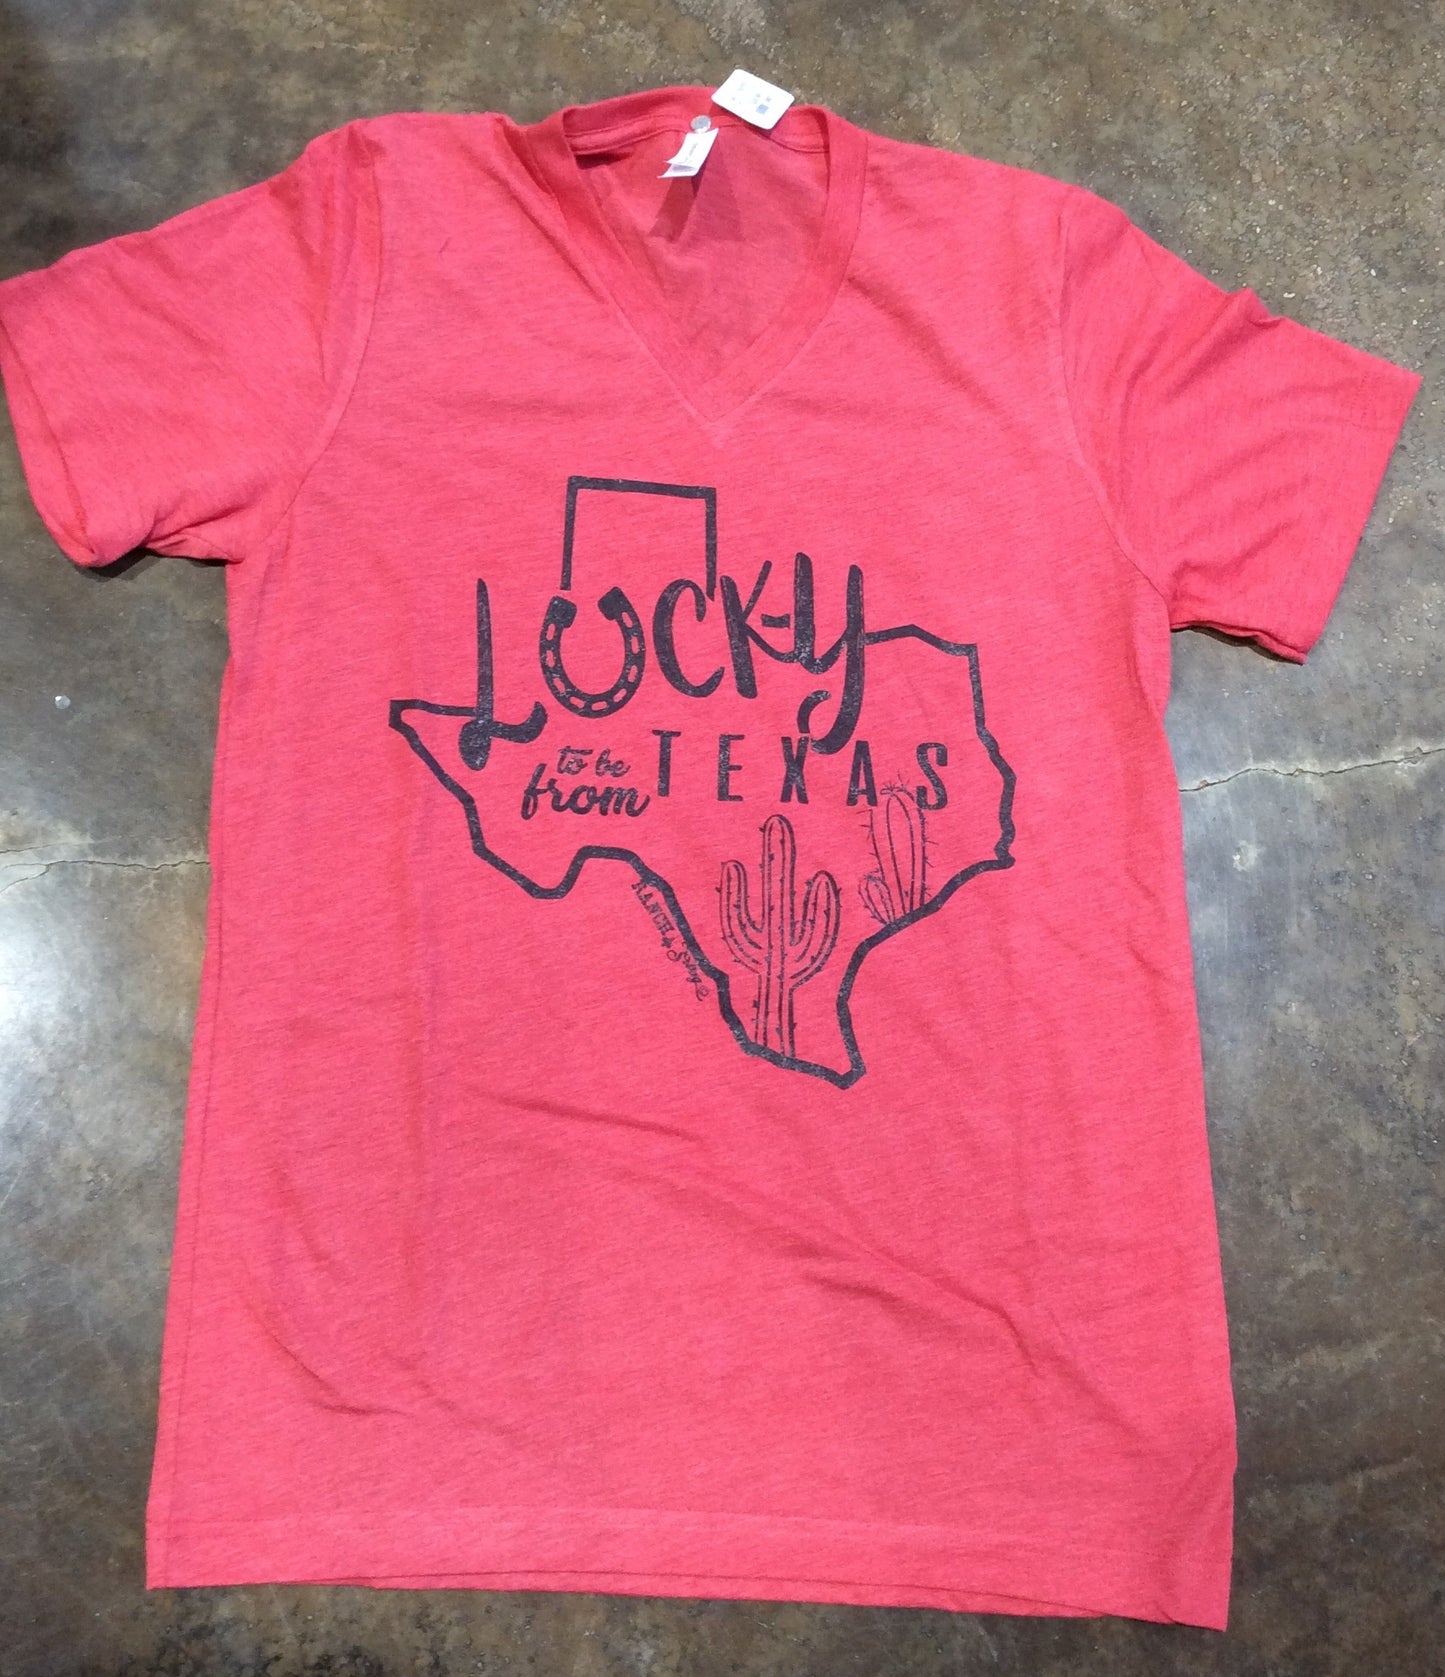 Lucky to be from Texas Tee Shirt